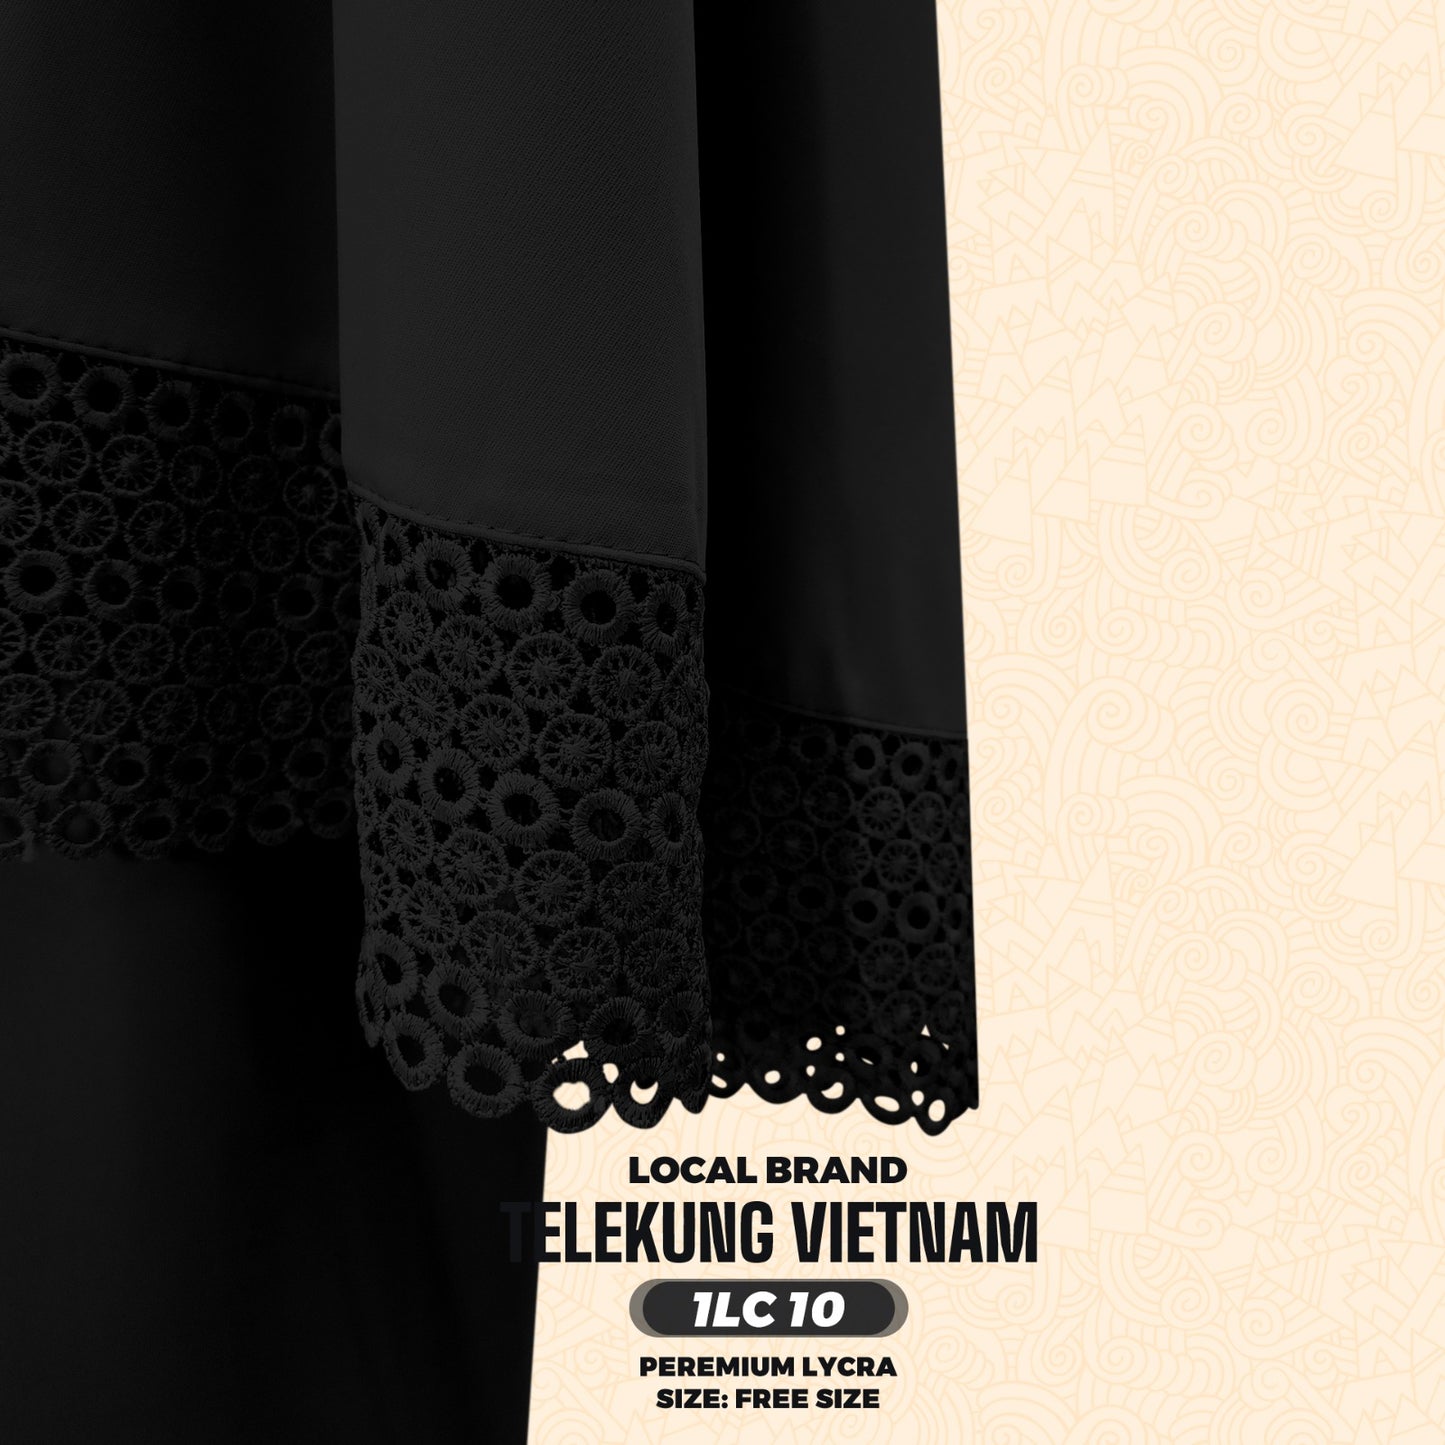 Telekung Local Brand LACE 1 Collection (1LC)